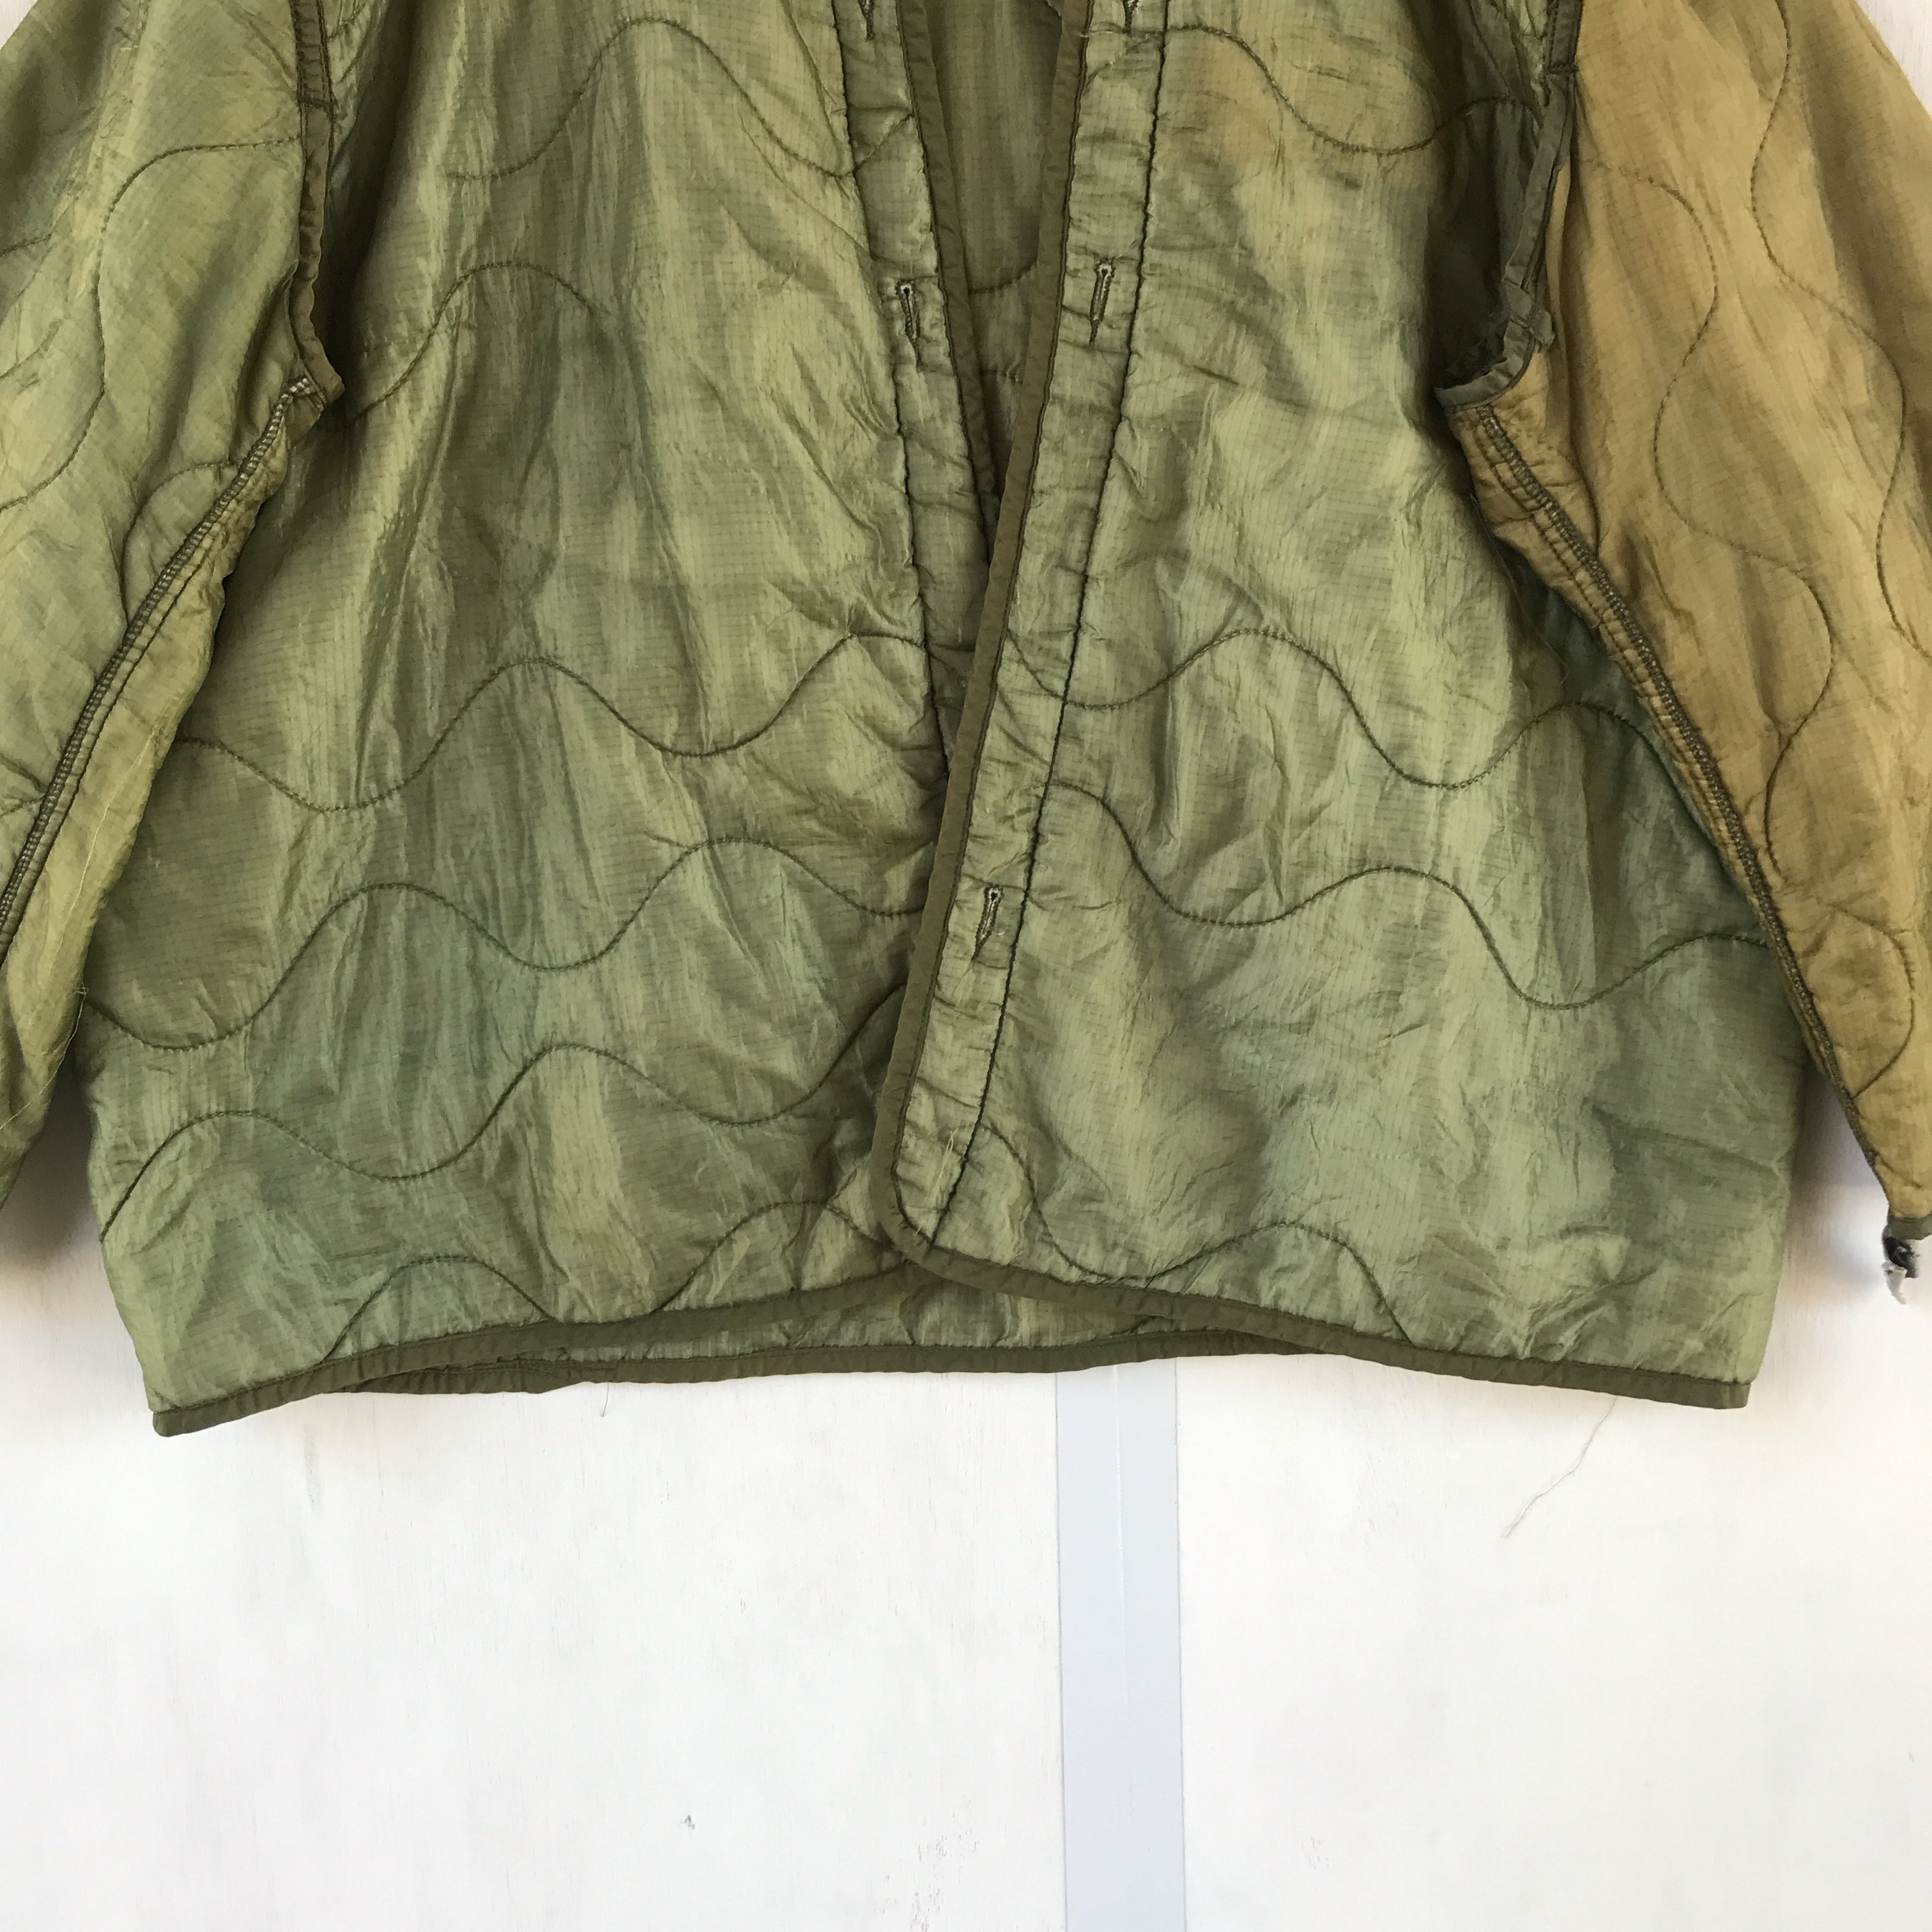 [ ONLY ONE ! ] 84's LINER, COLD WEATHER COAT, MAN'S /U.S.MILITARY